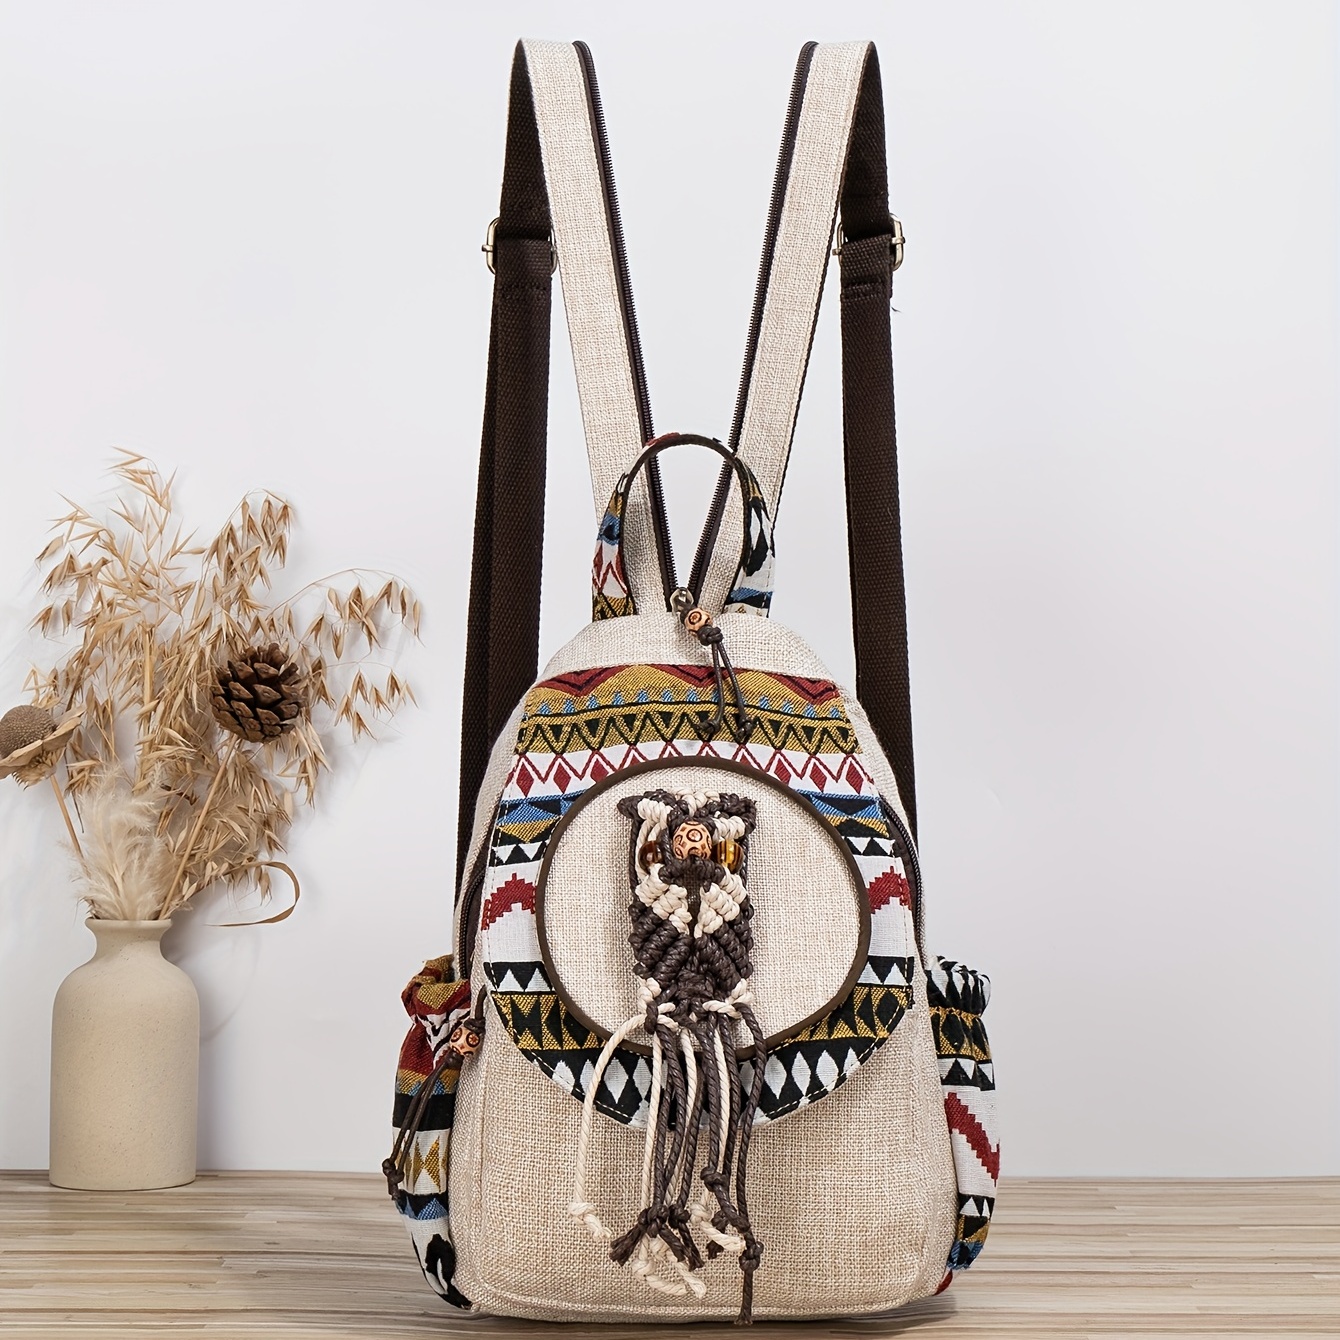 Sac à dos femme vintage chic – Chic and Bohemian